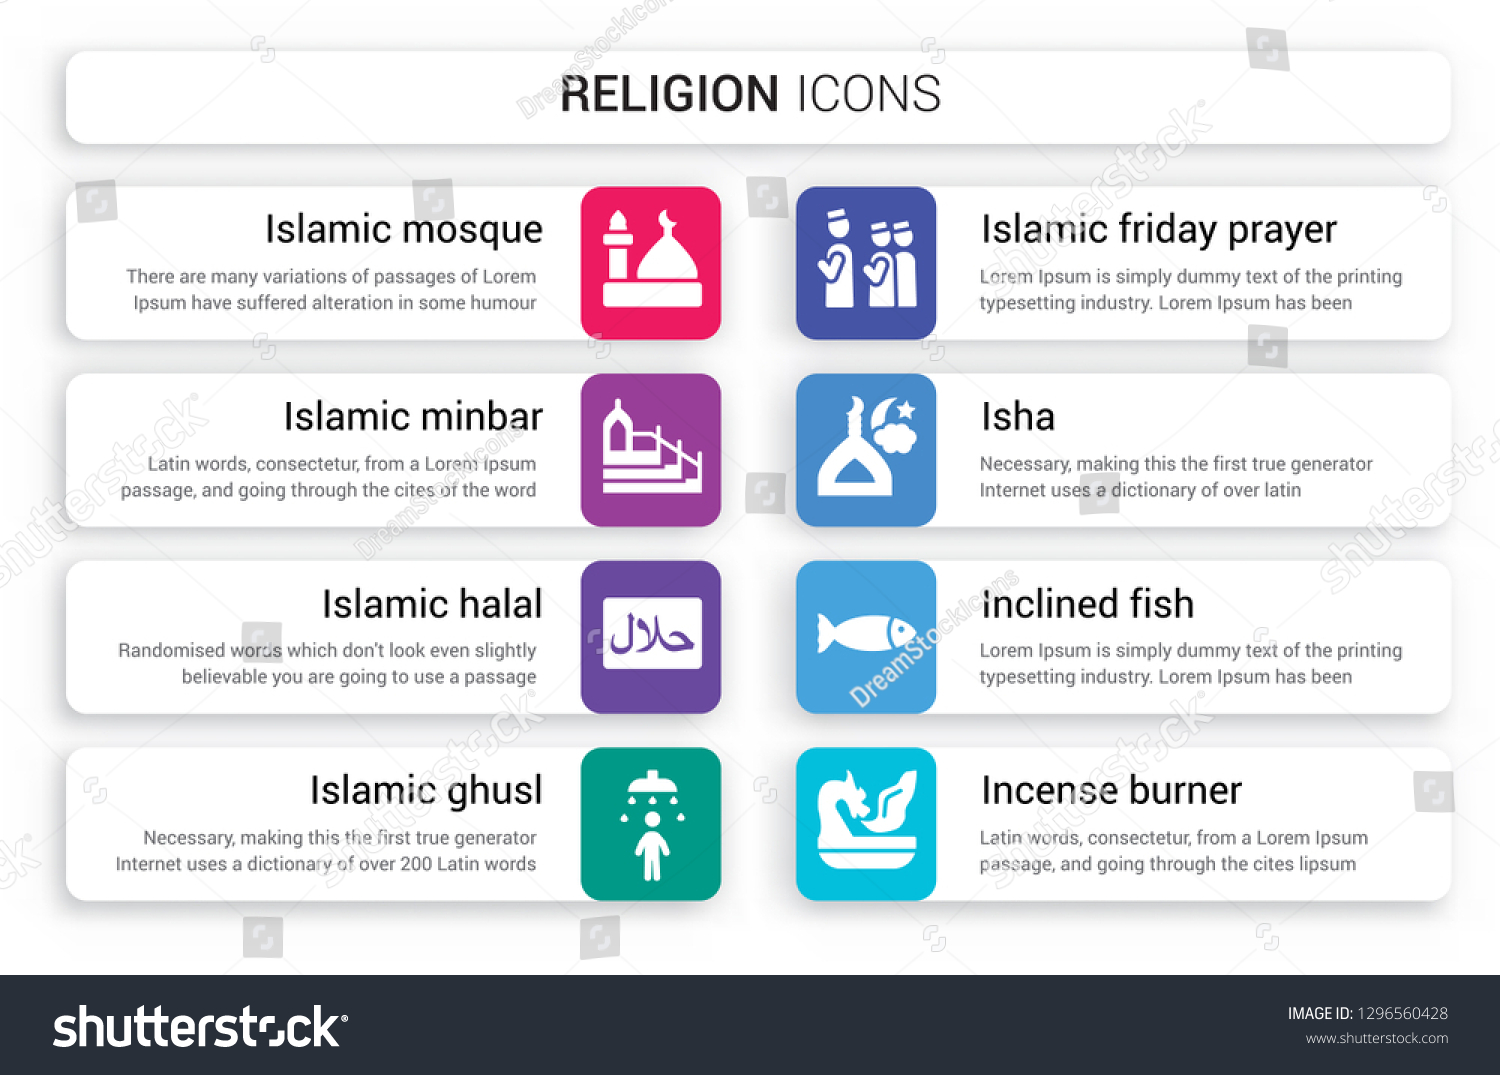 SVG of Set of 8 white religion icons such as Islamic Mosque, Minbar, Halal, Ghusl, Friday Prayer, Isha isolated on colorful background svg